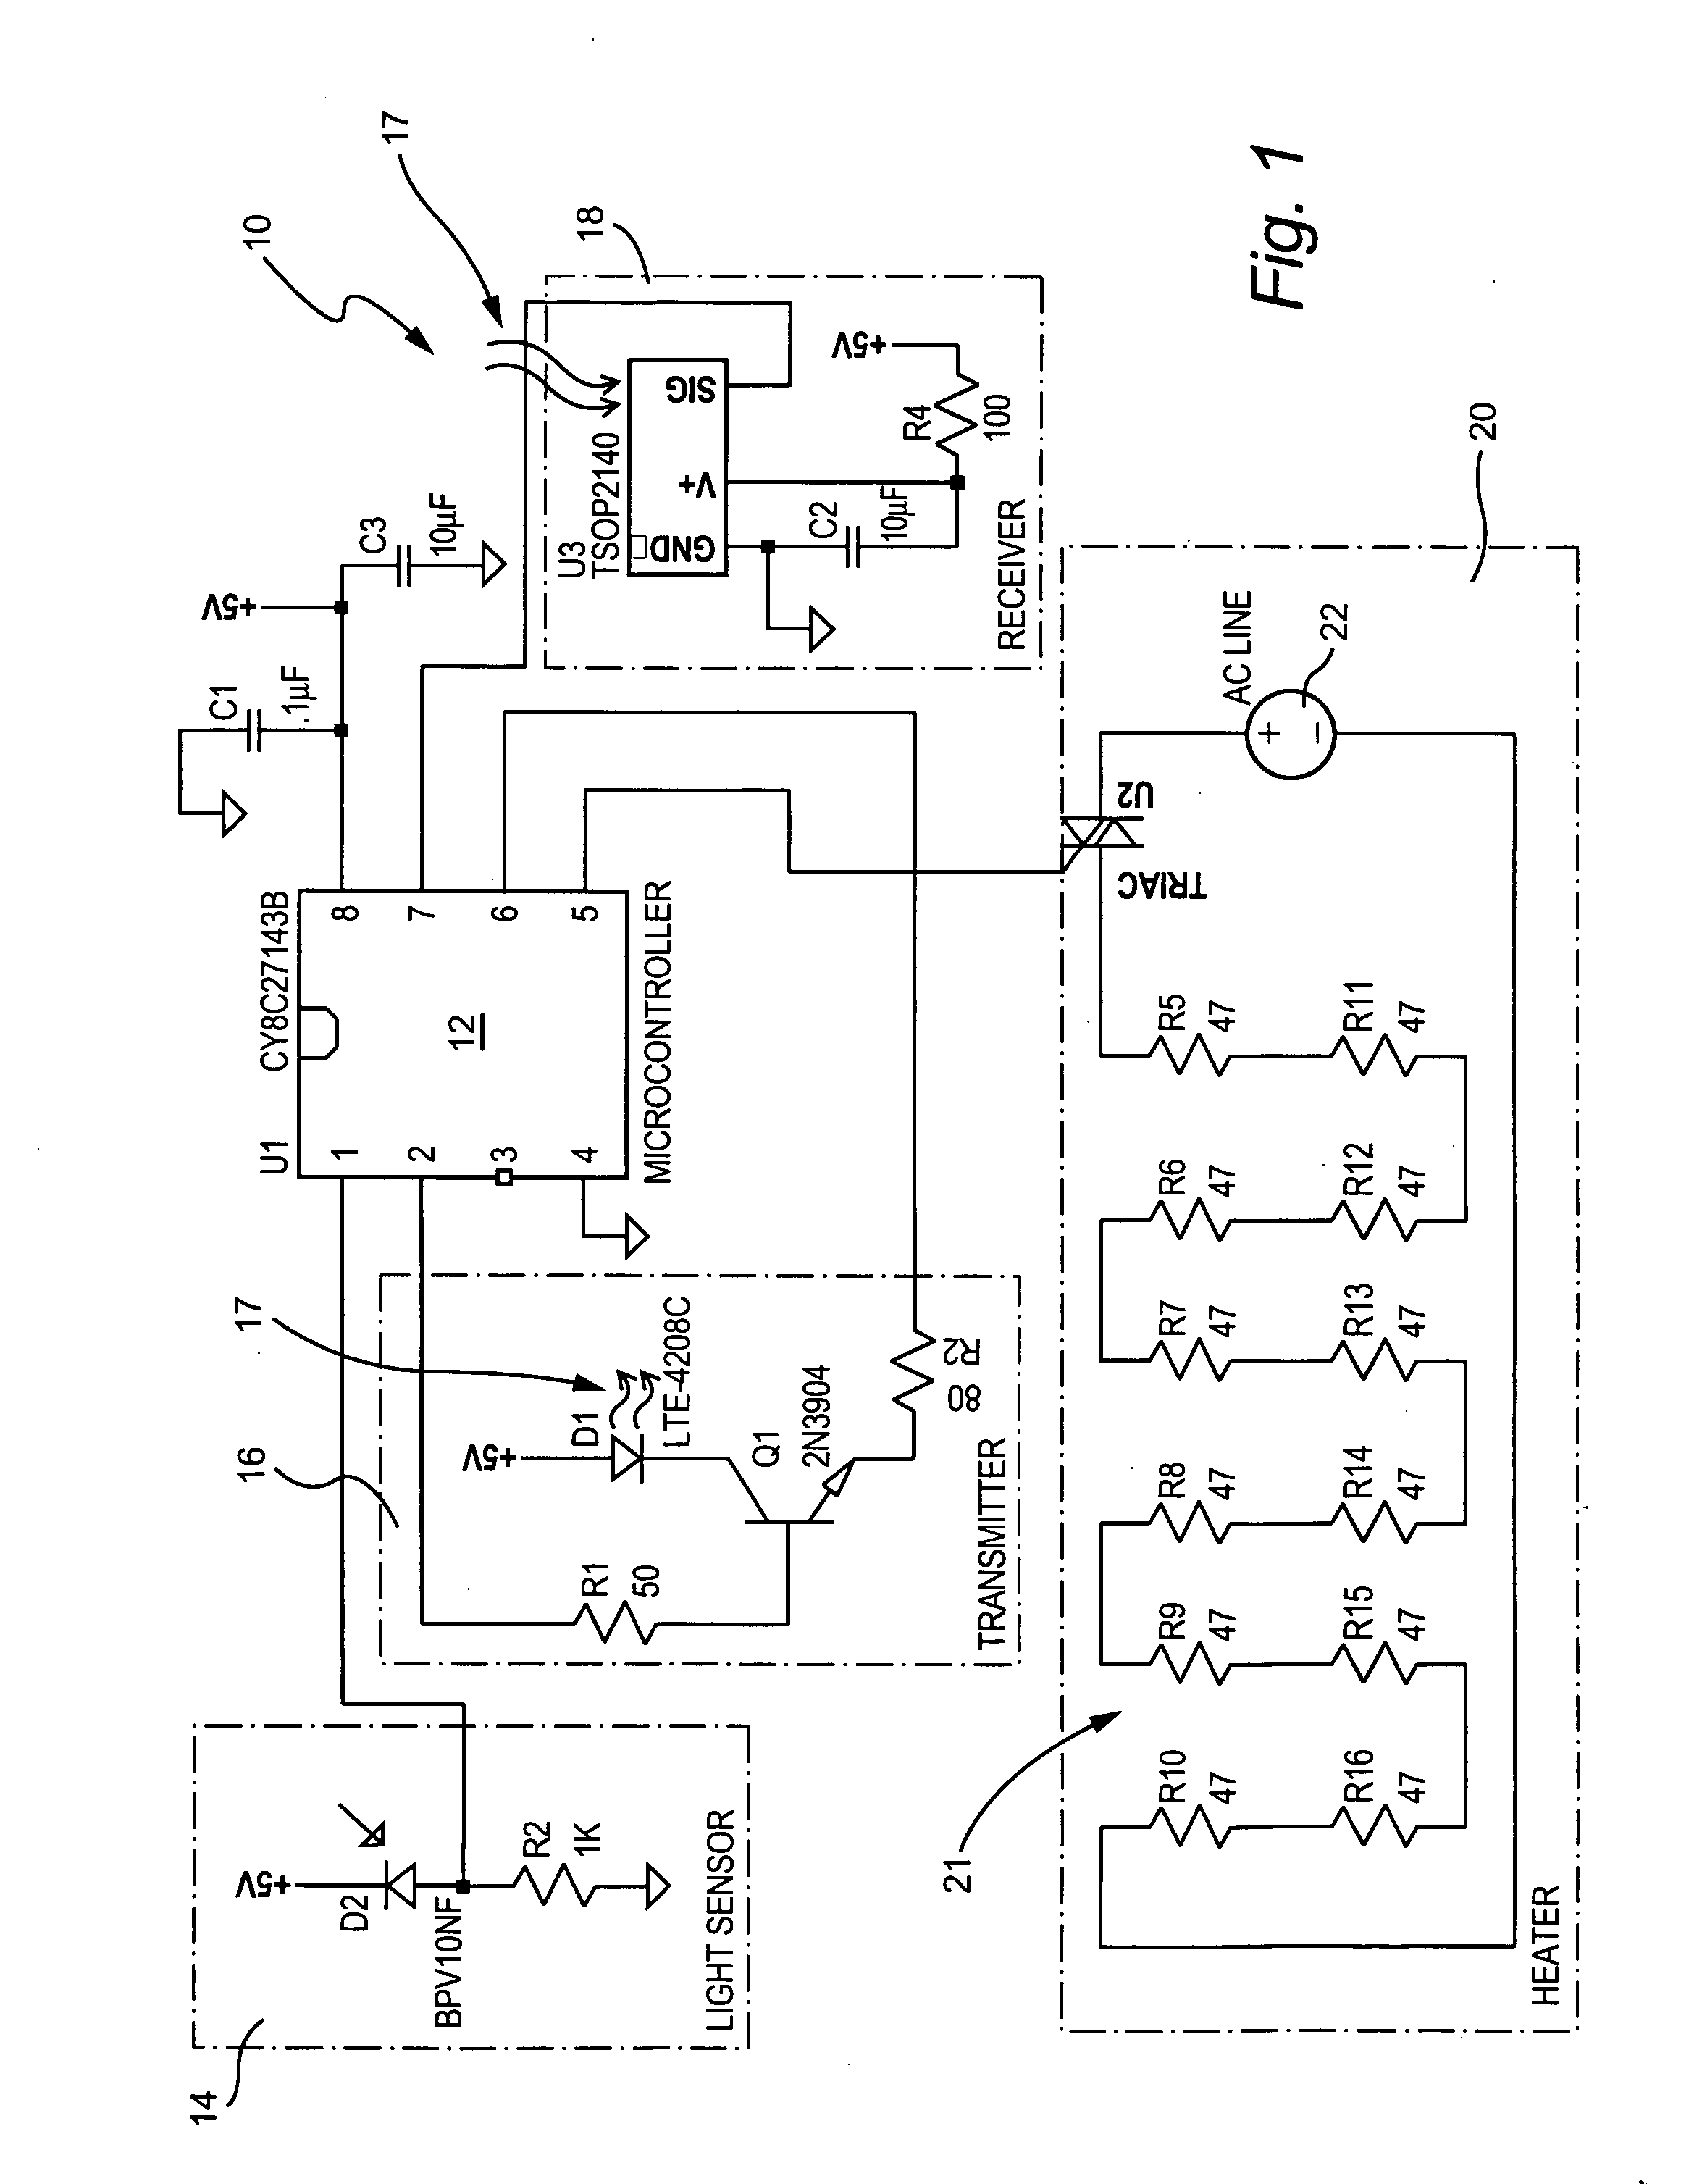 De-icing system for traffic signals